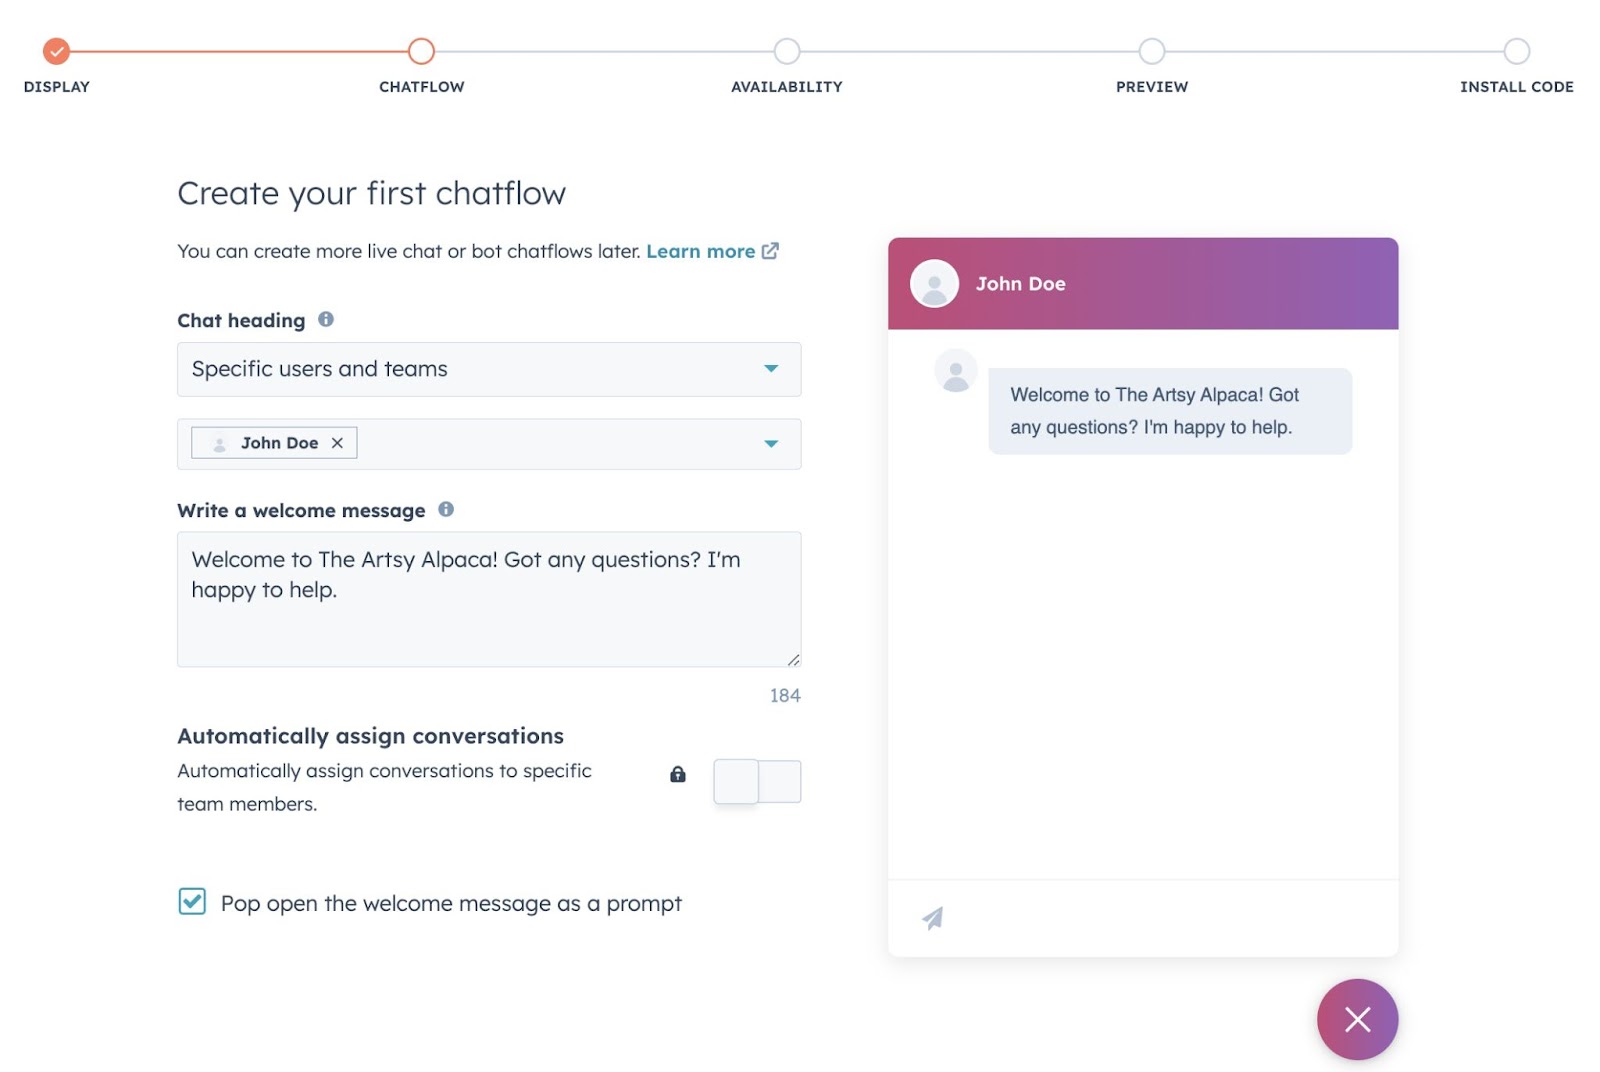 "Chatflow" setup page on "HubSpot Marketing Hub" with multiple input boxes and a toggle to automatically assign conversations.